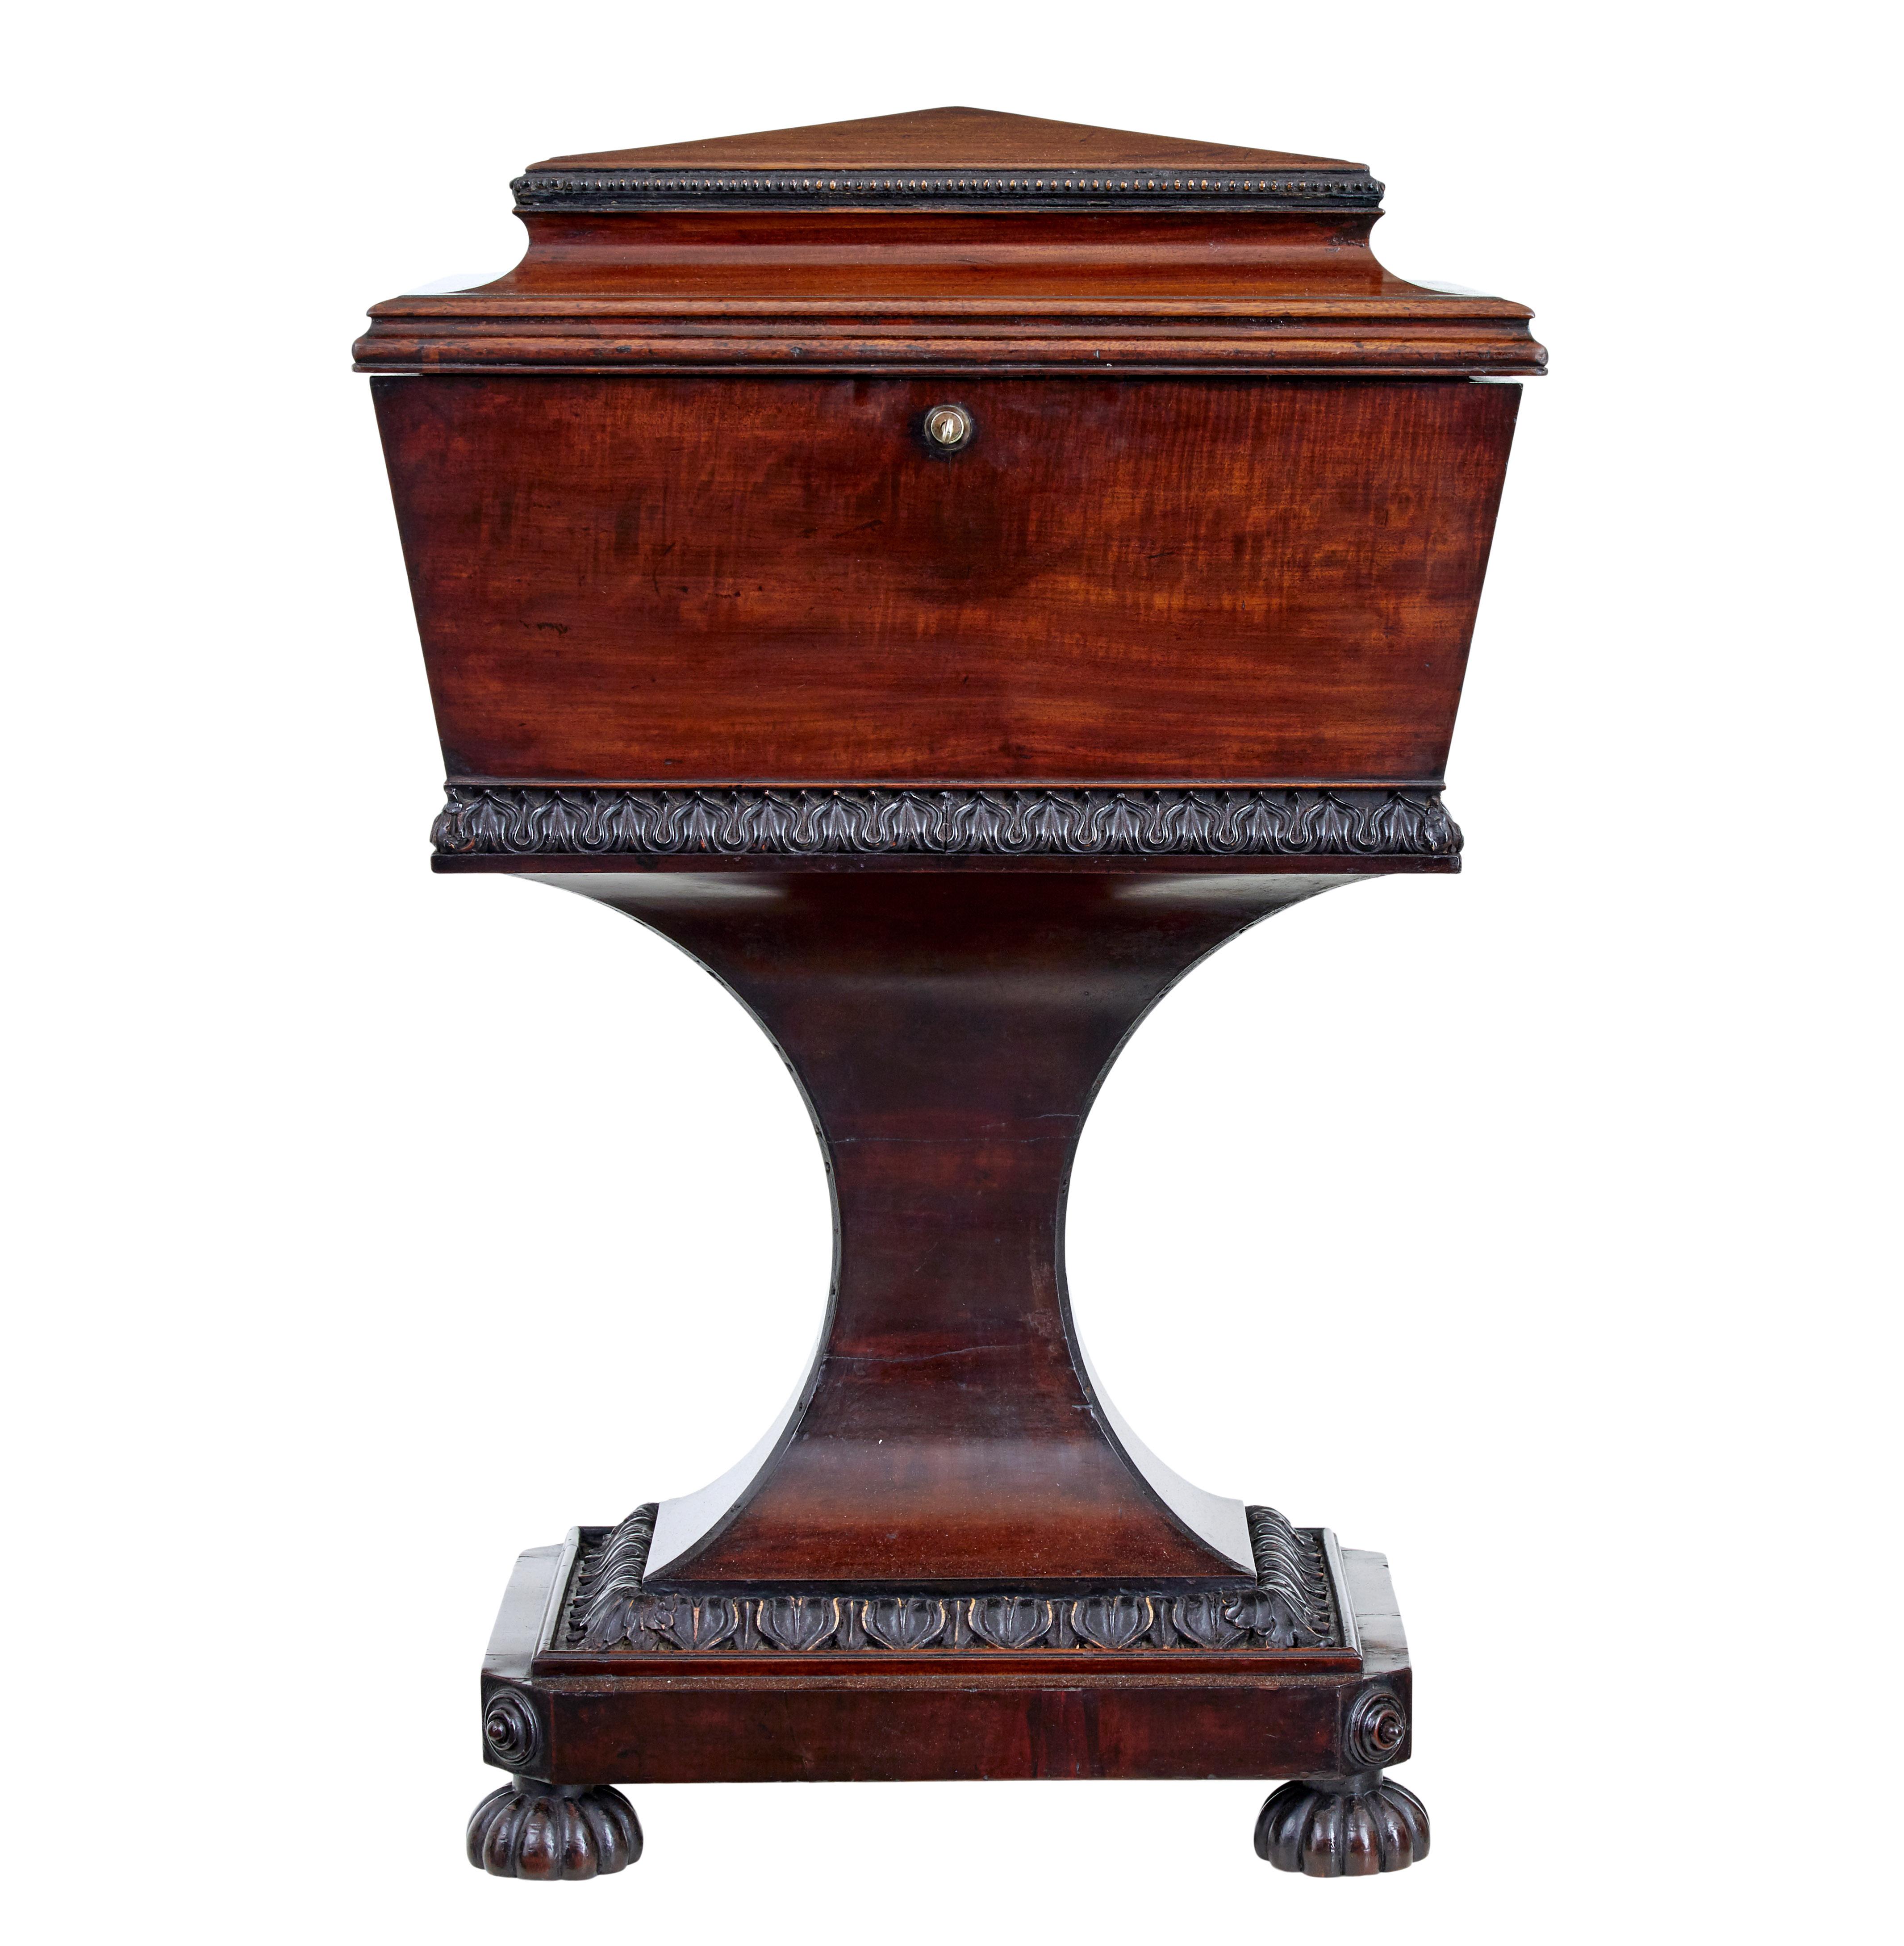 Superb quality Gillows regency mahogany teapoy circa 1820.

The main body being of sarcophagus form, which opens to 4 mahogany slides on each corner, 1 large tole compartment flanked either side by a smaller caddy. Original velvet lining to the lid